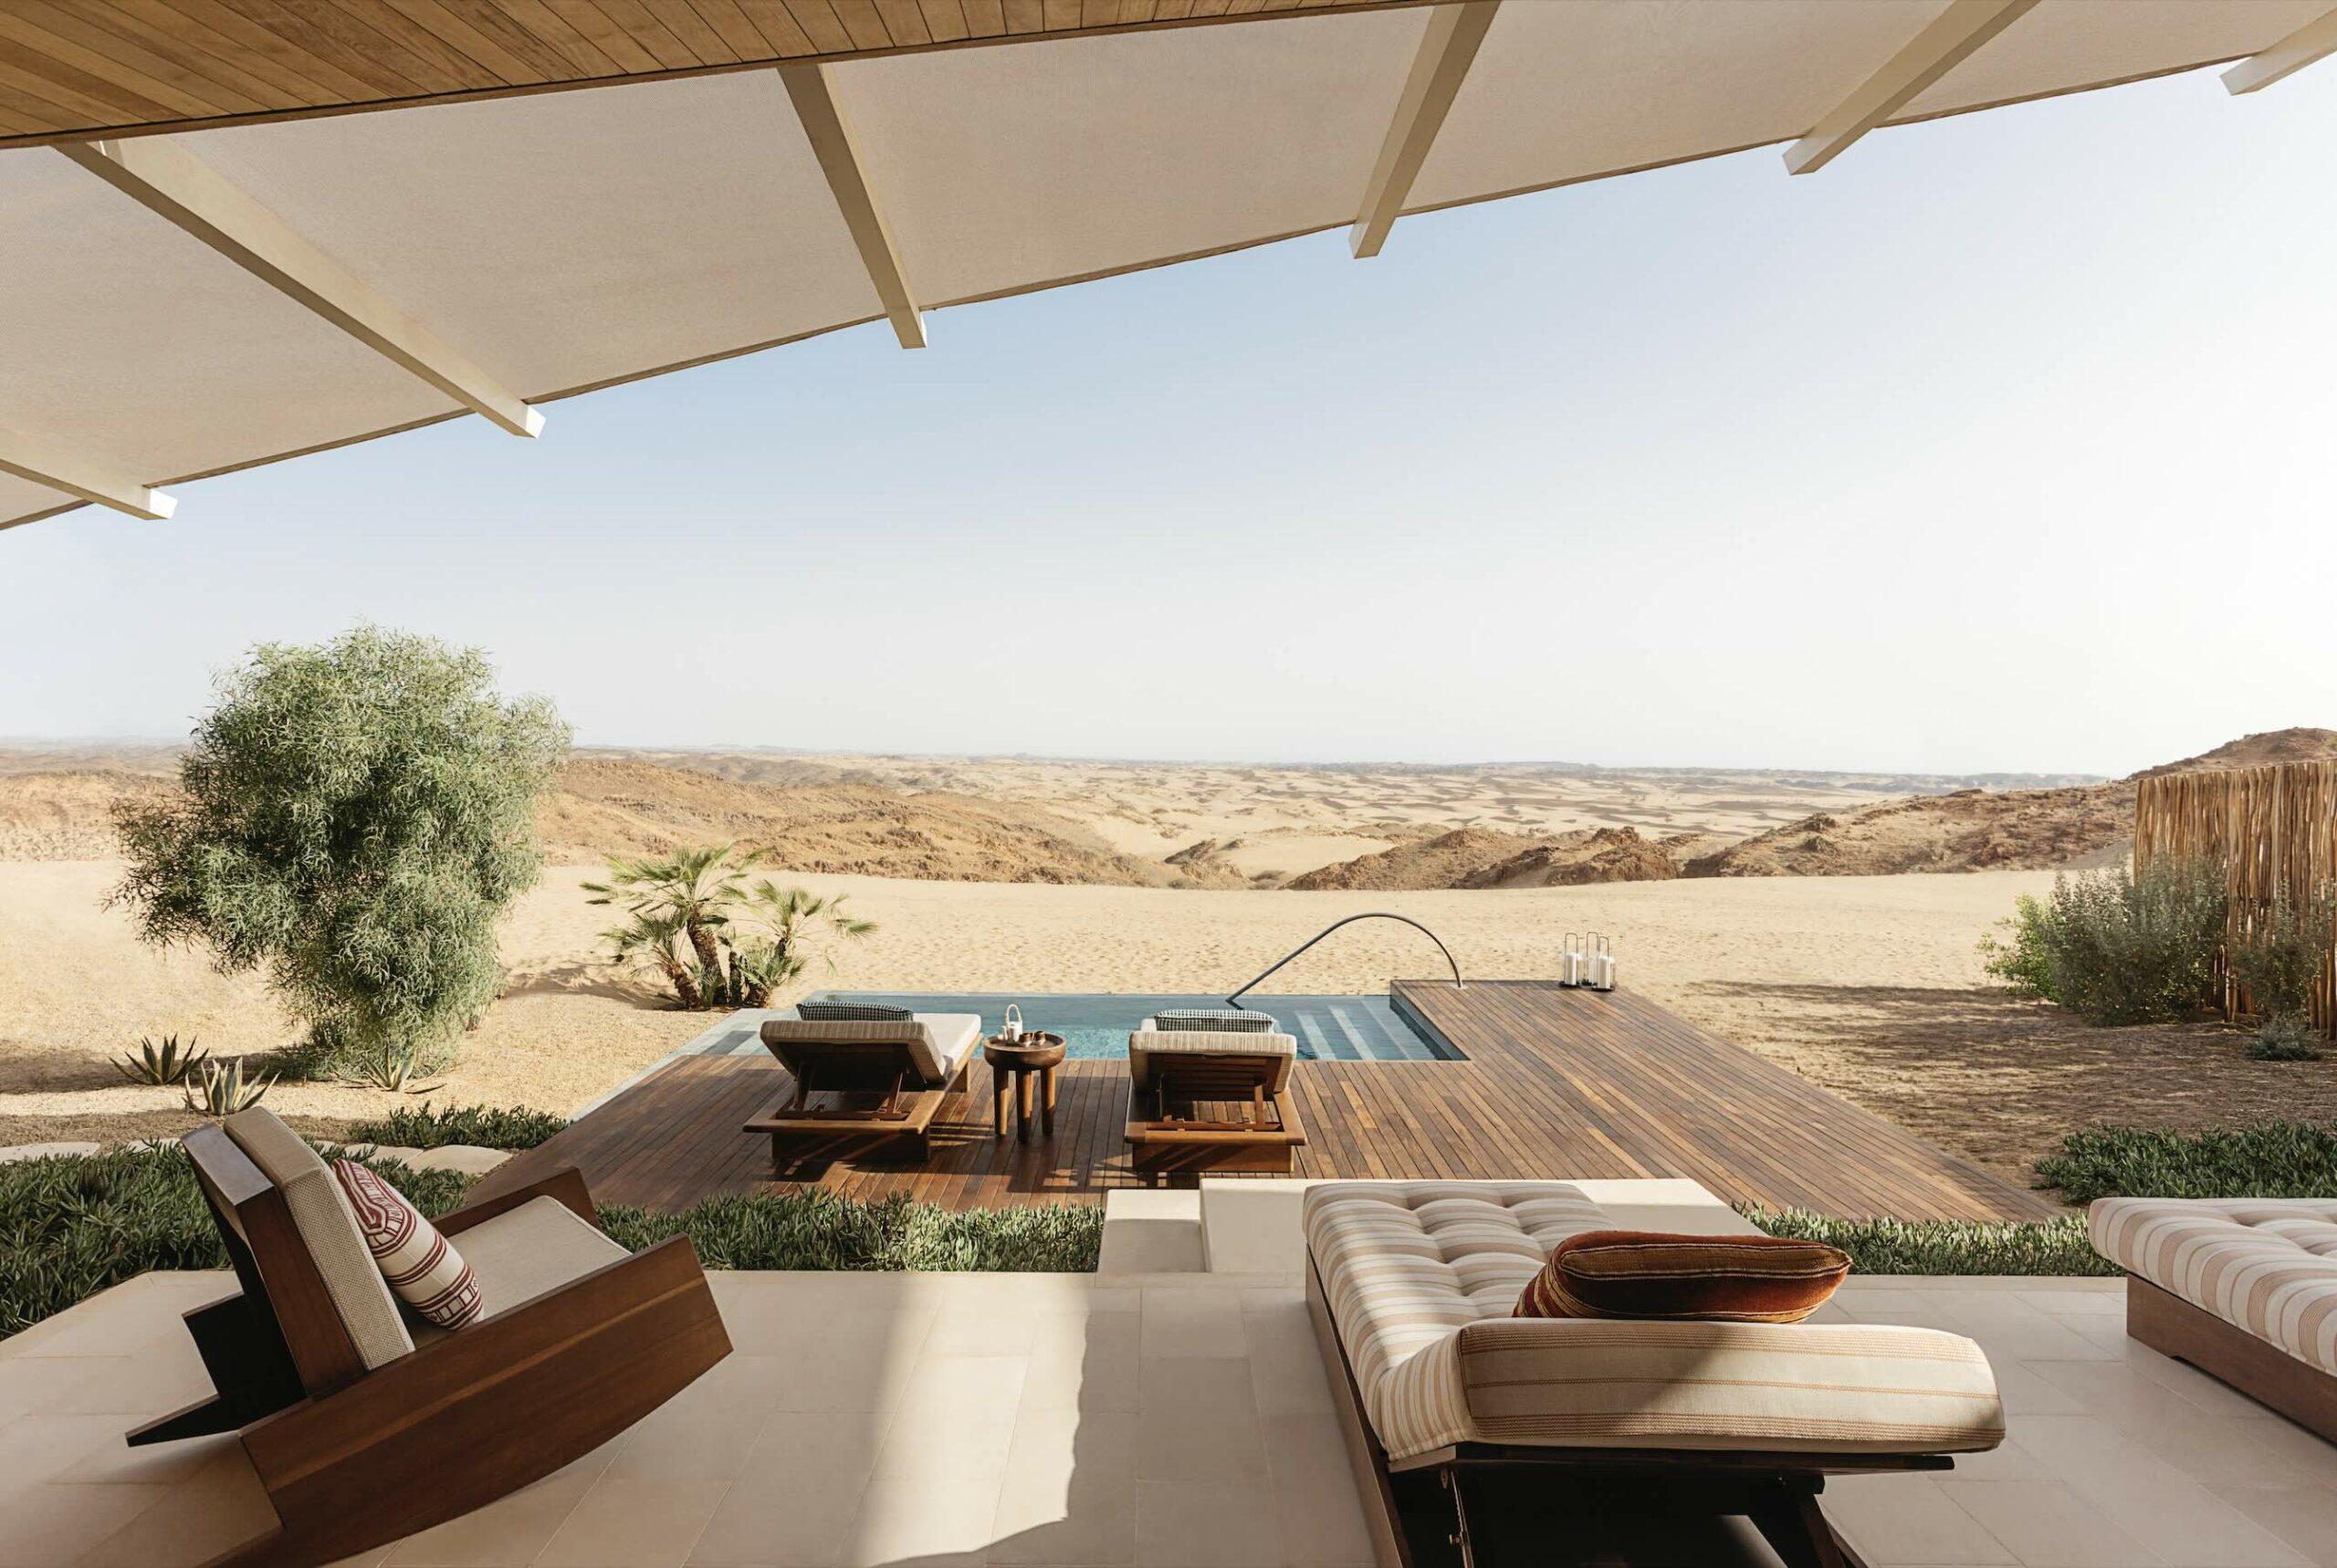 Staycation Spotlight: Six Senses Southern Dunes, The Red Sea